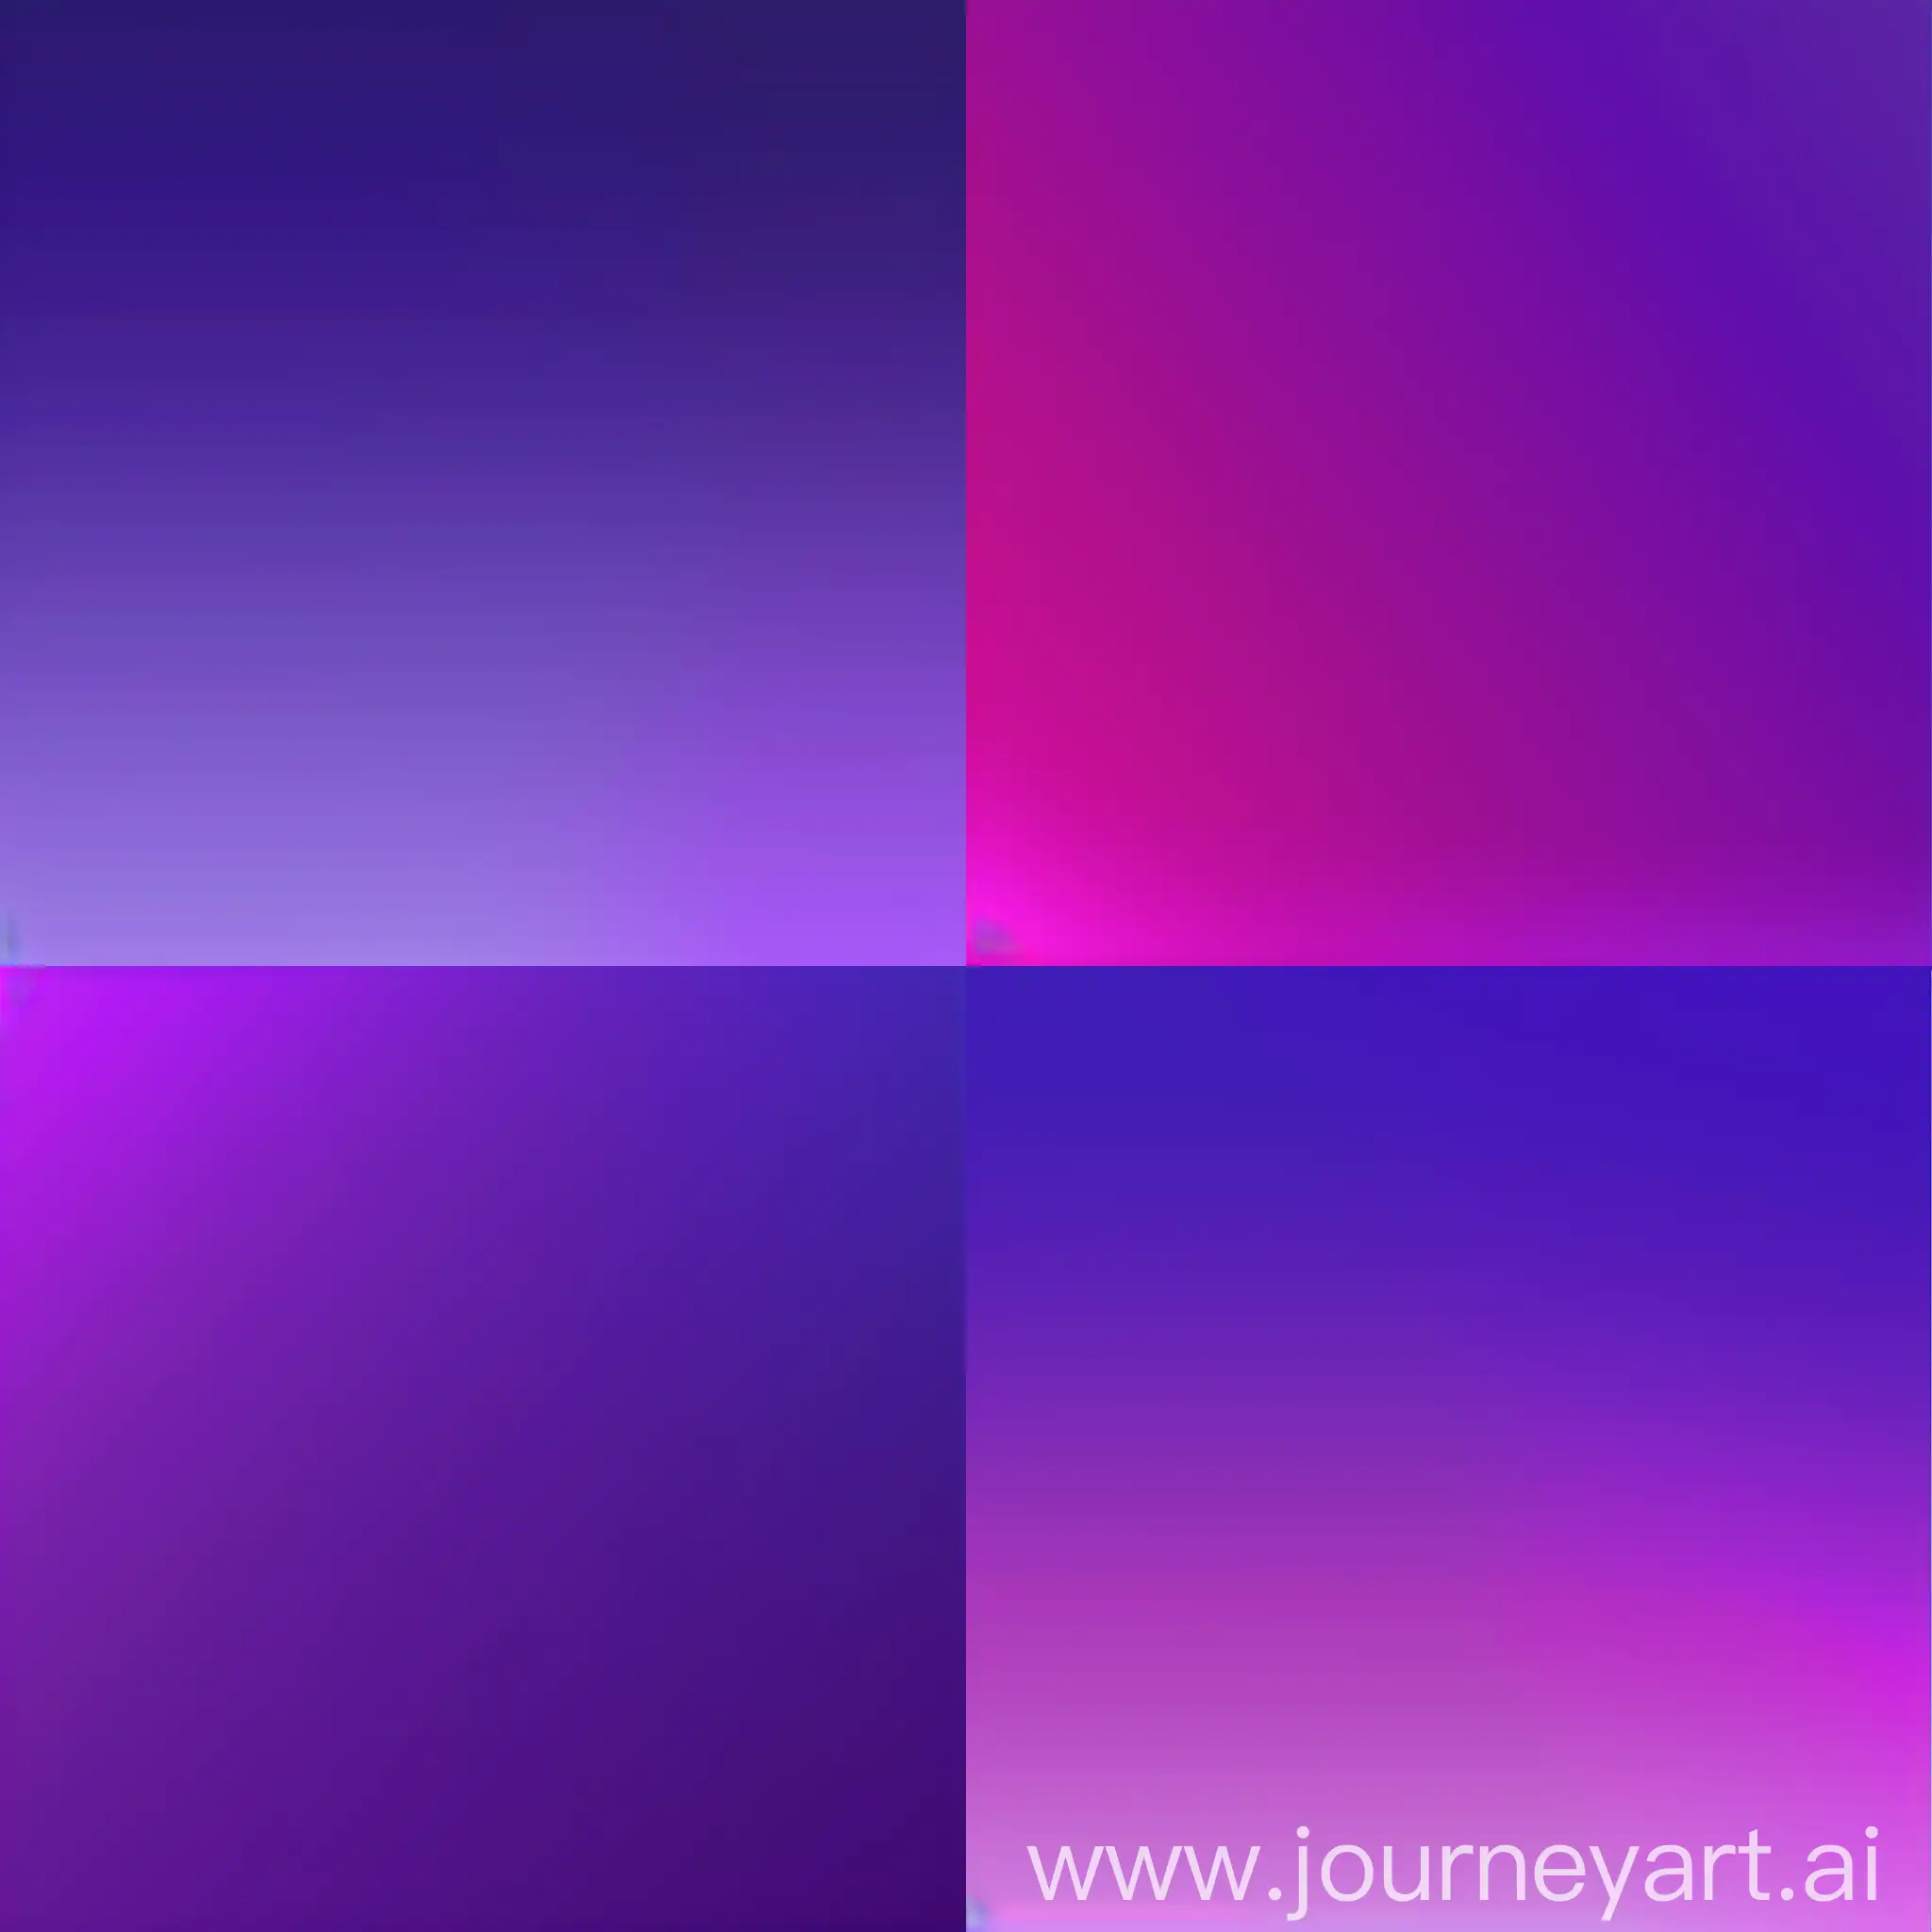 Purple-Gradient-Abstract-Art-with-Geometric-Shapes